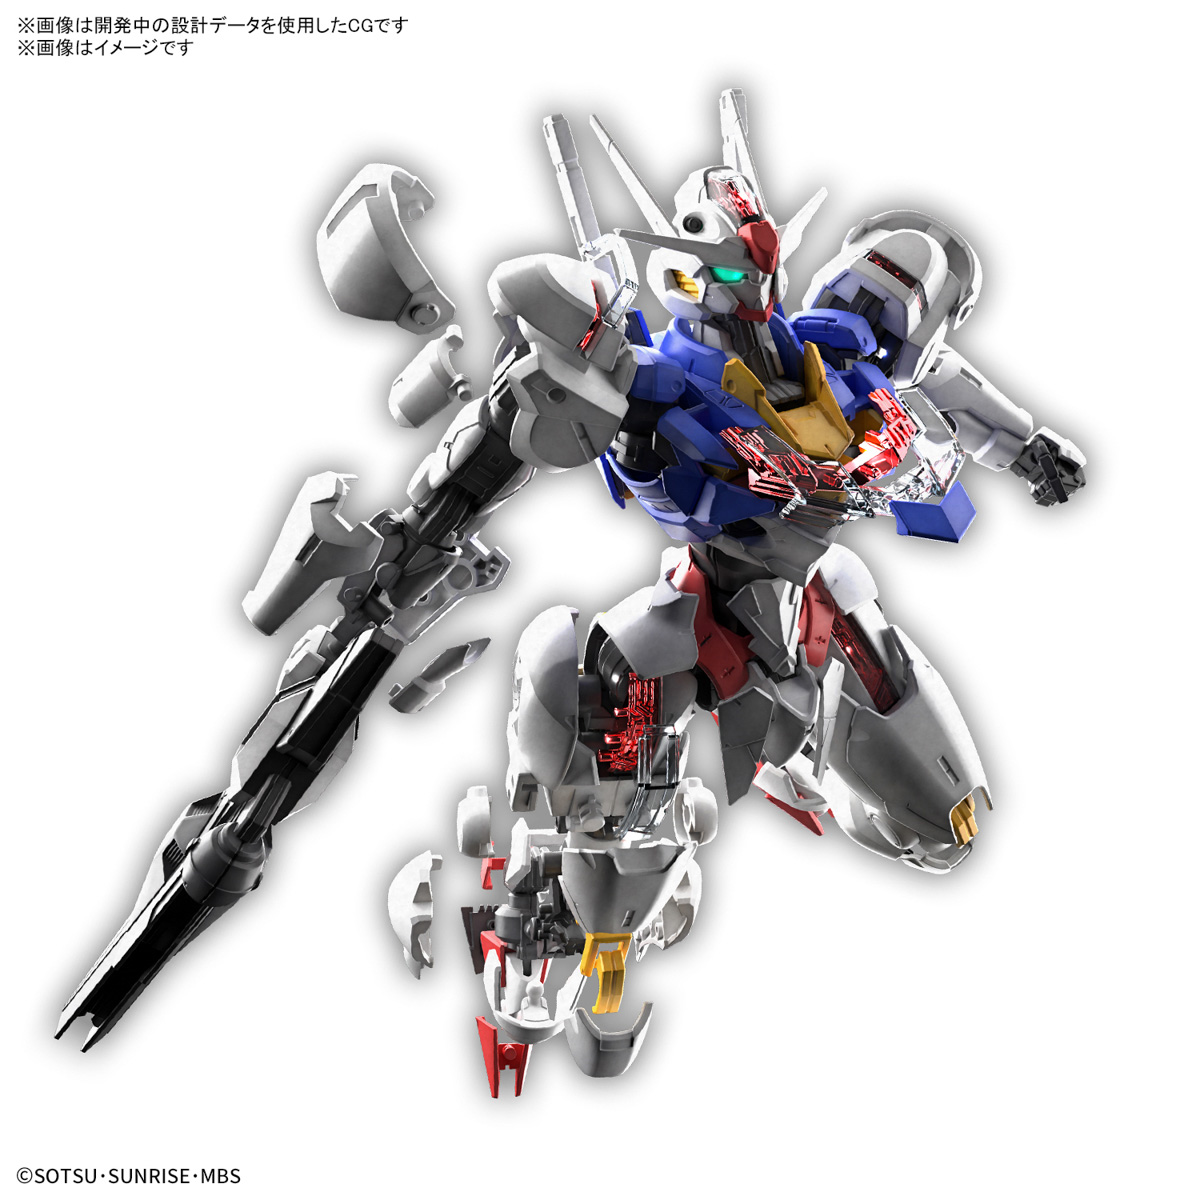  Full Mechanics Mobile Suit Gundam, Witch of Mercury, Gundam  Aerial, 1/100 Scale, Color-Coded Plastic Model : Arts, Crafts & Sewing